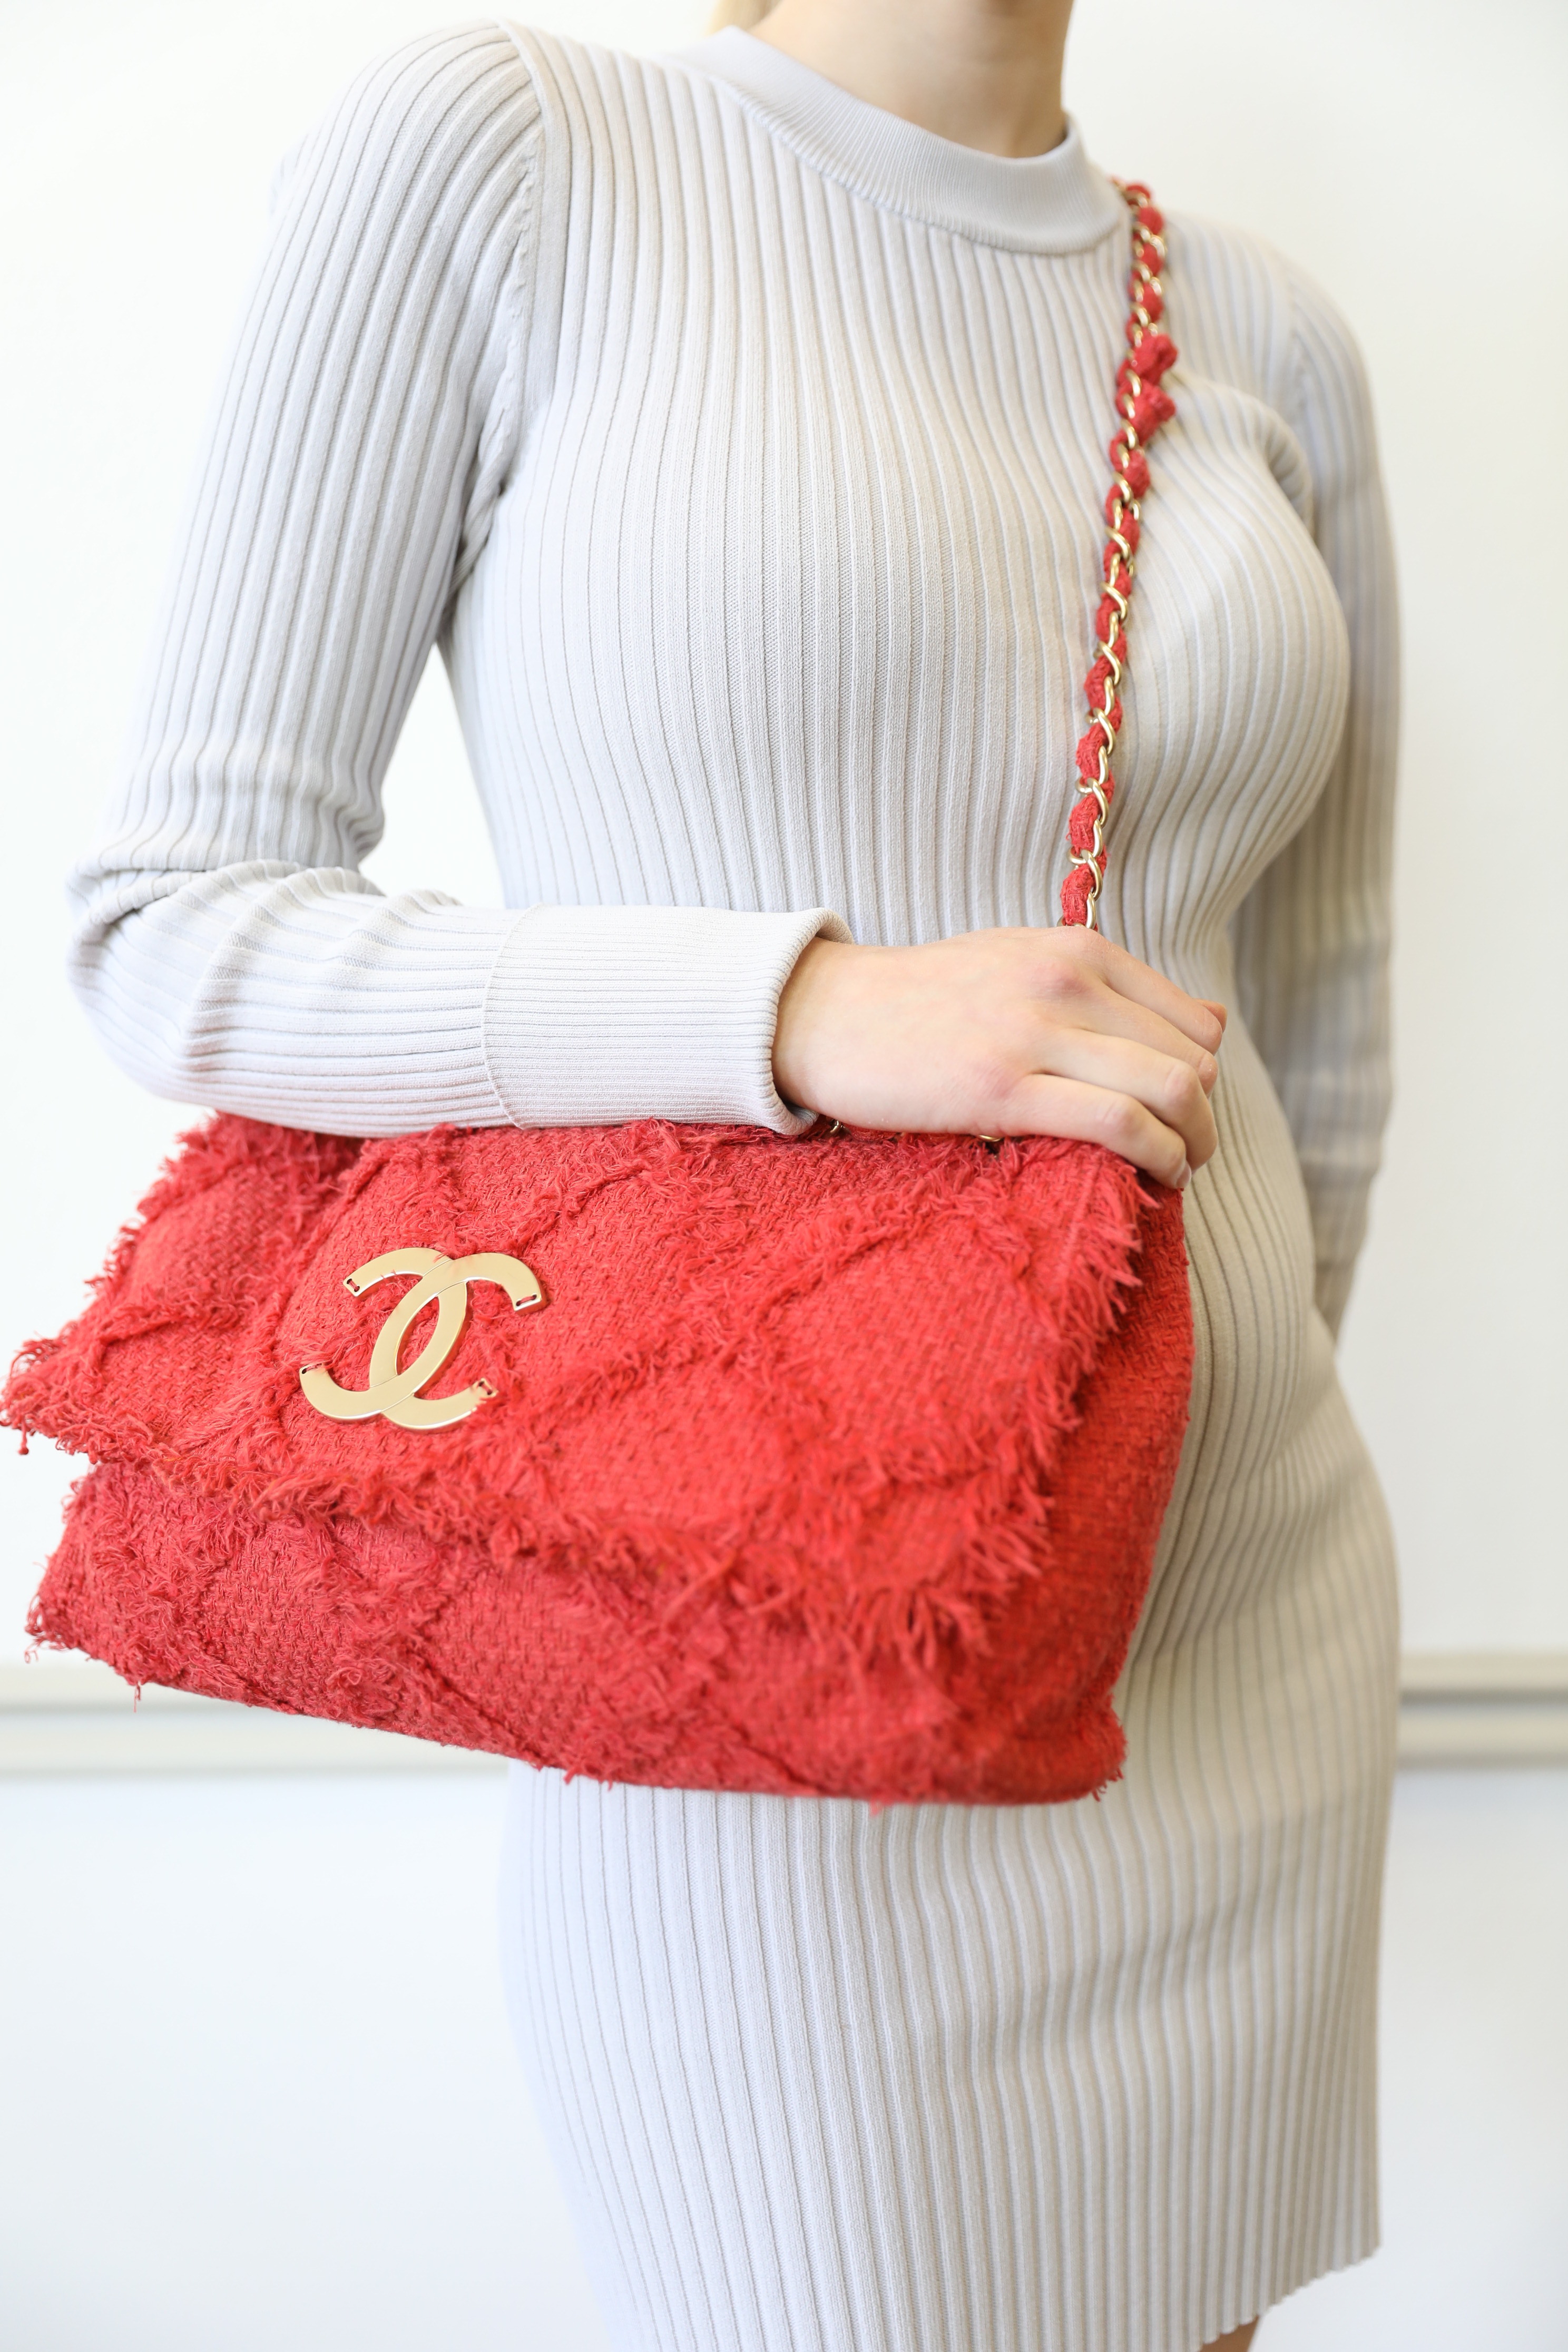 Chanel Fringe Bag, Red Tweed with Gold Hardware, Preowned No Dustbag WA001